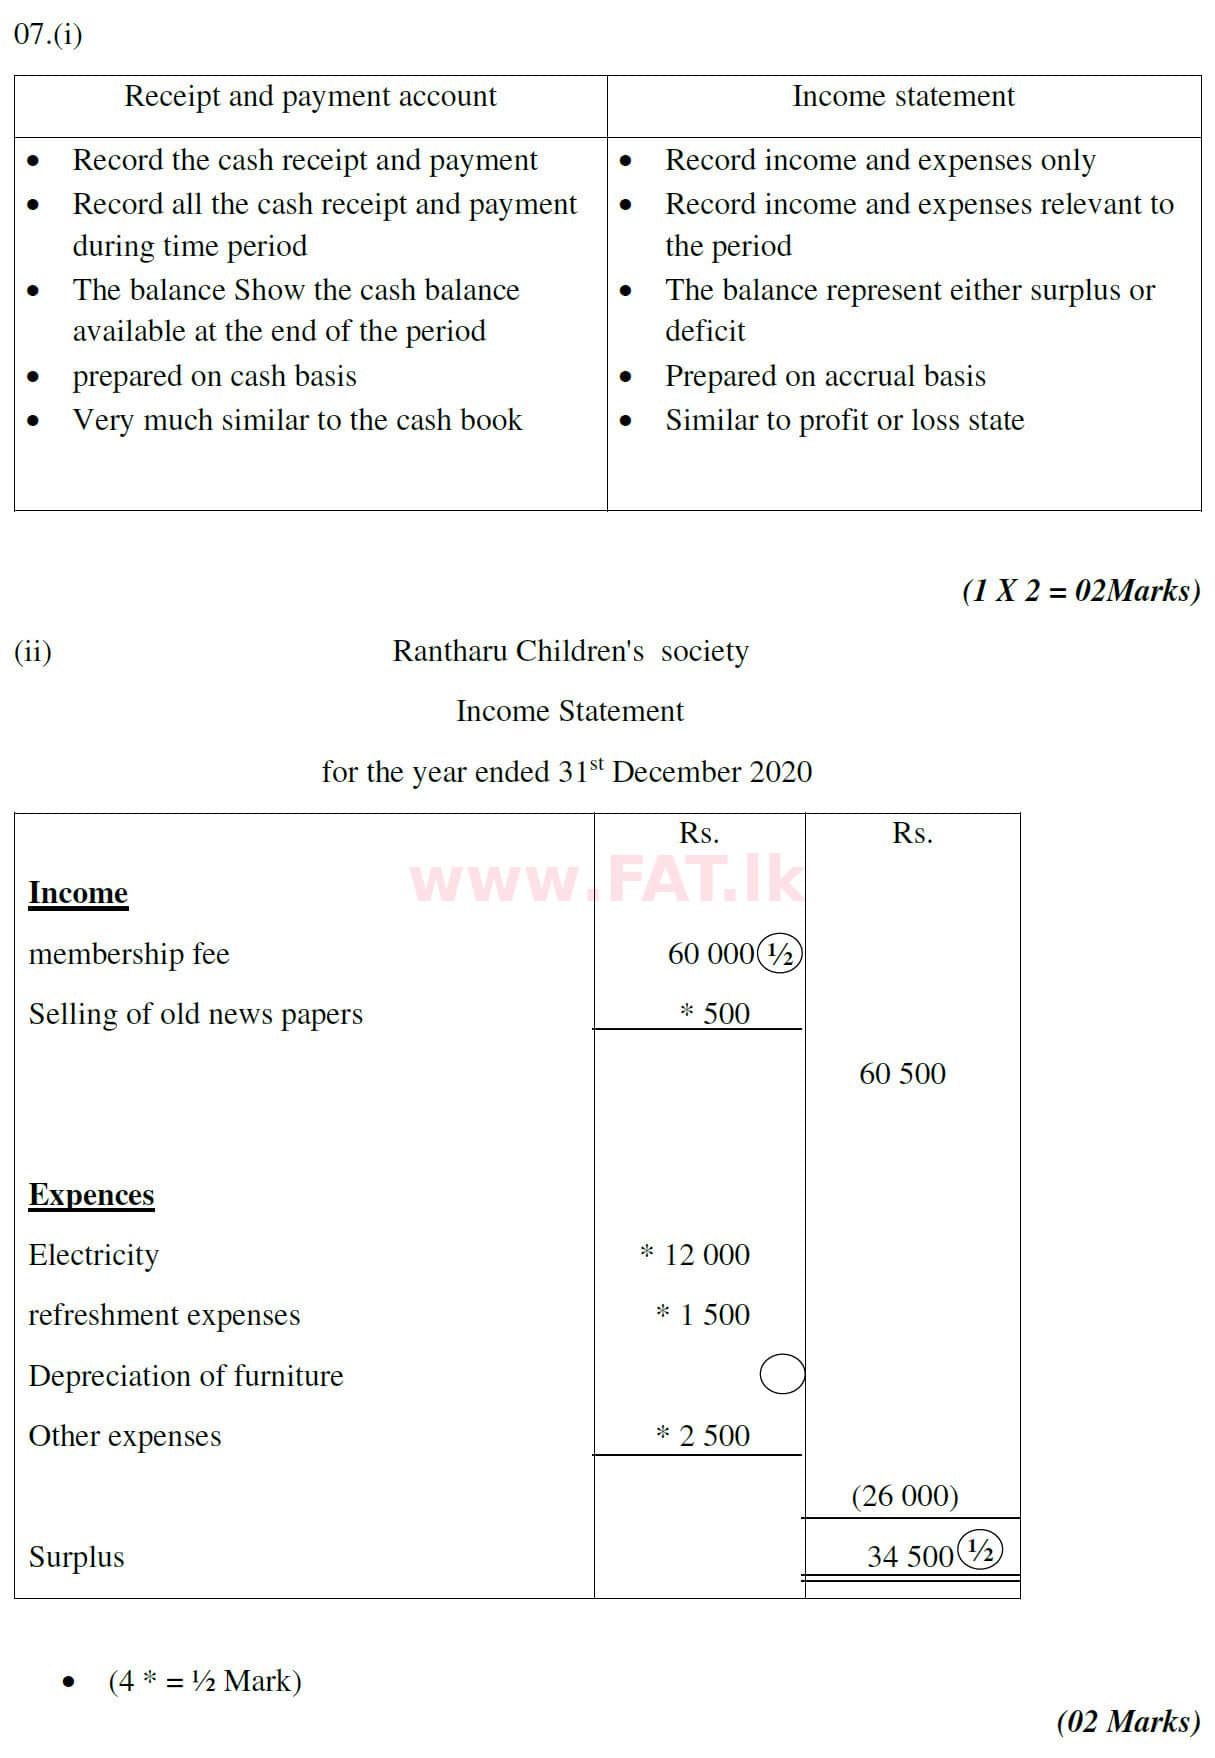 National Syllabus : Ordinary Level (O/L) Business and Accounting Studies - 2020 March - Paper II (English Medium) 7 5805